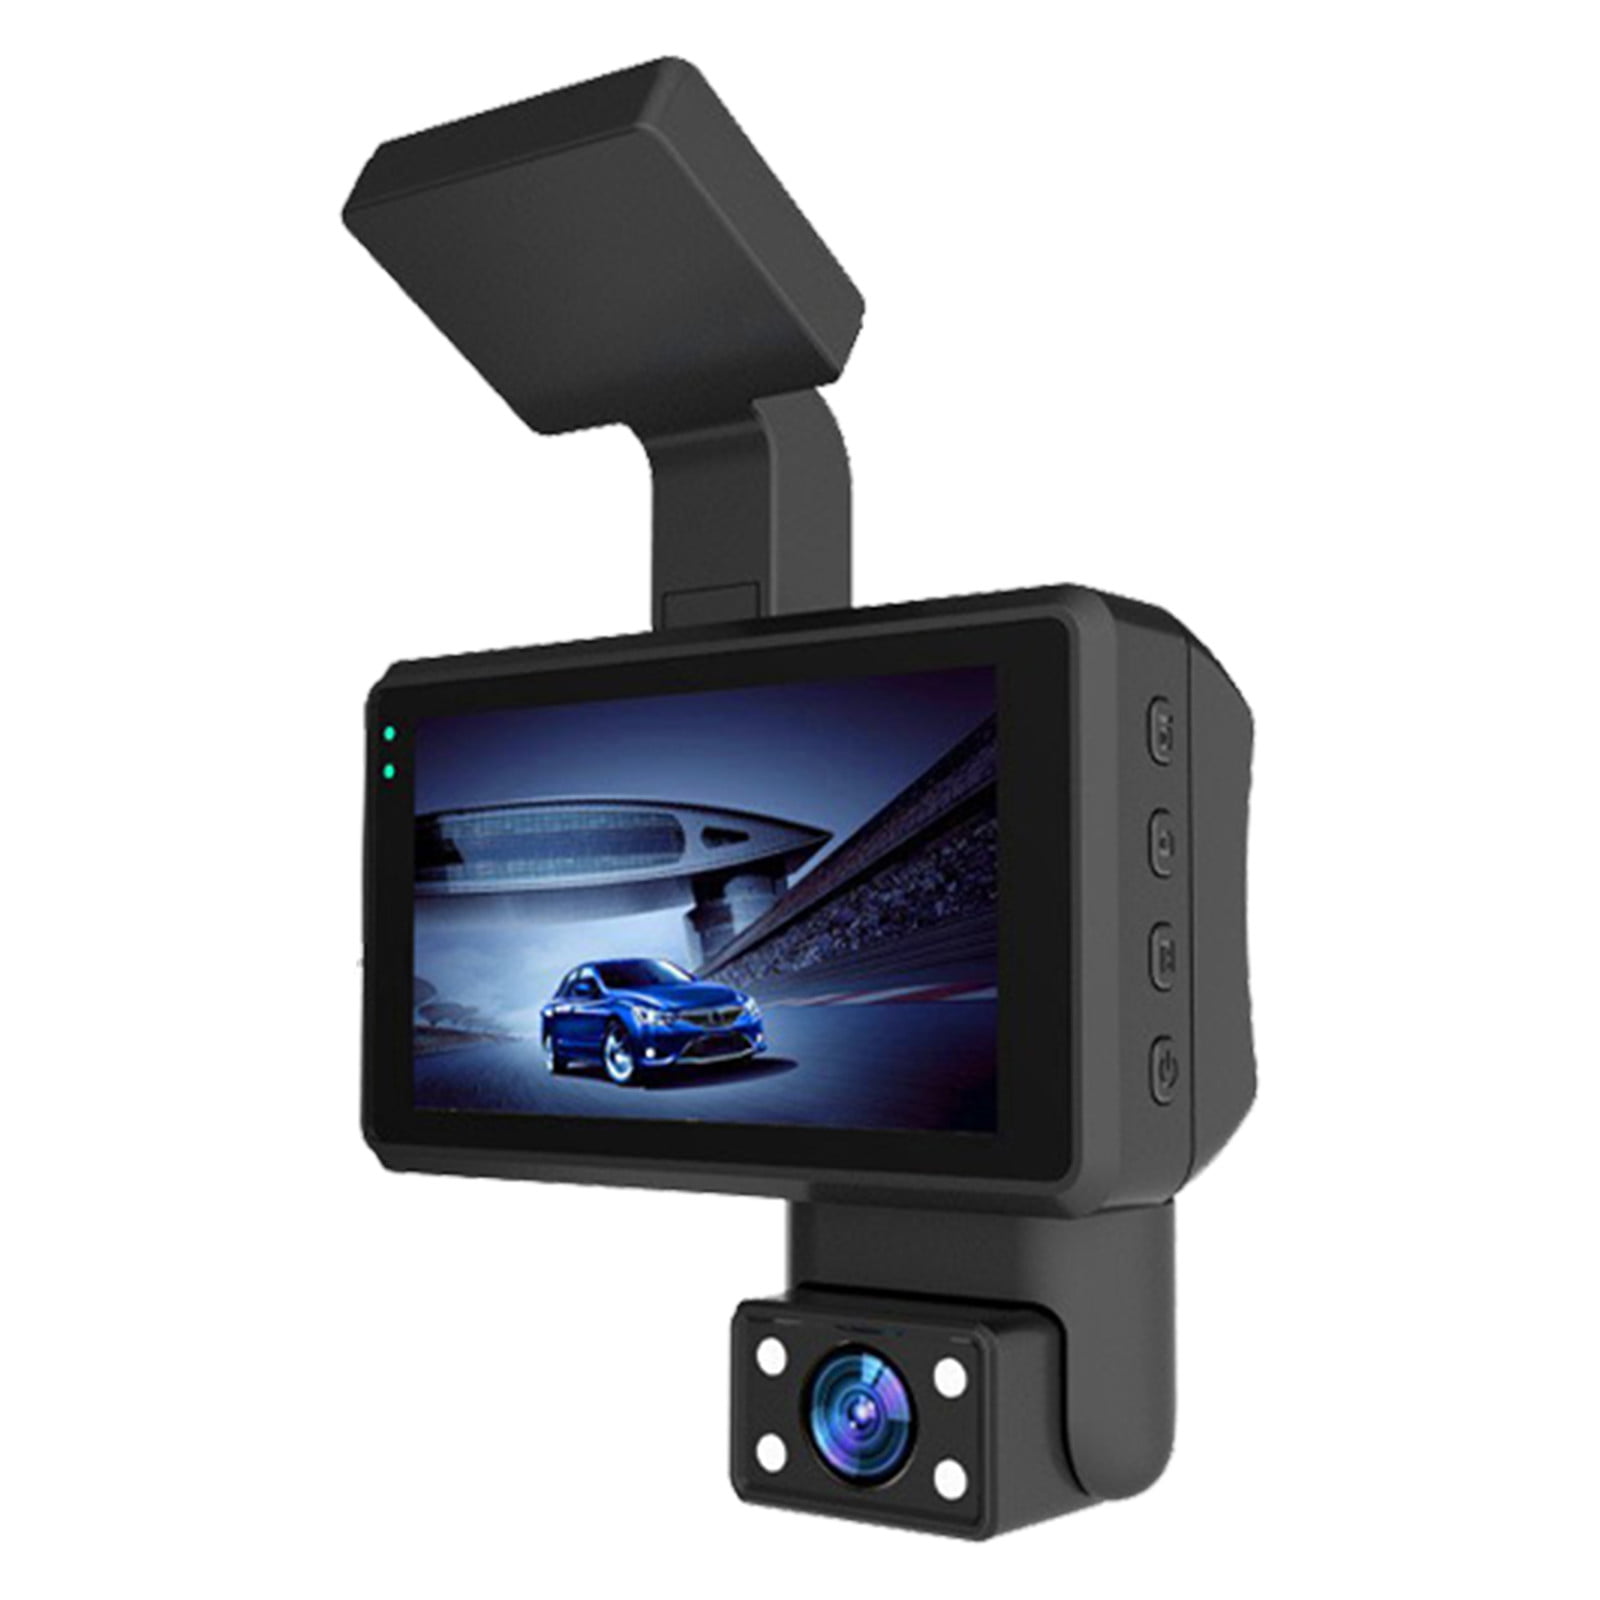 3 Channel Dash Cam Front and Rear Inside,WIZACE 1080P Full HD 170 Deg Wide  Angle Dashboard Camera, 2.0 Inch IPS Screen,G-Sensor,Loop Recording,24H